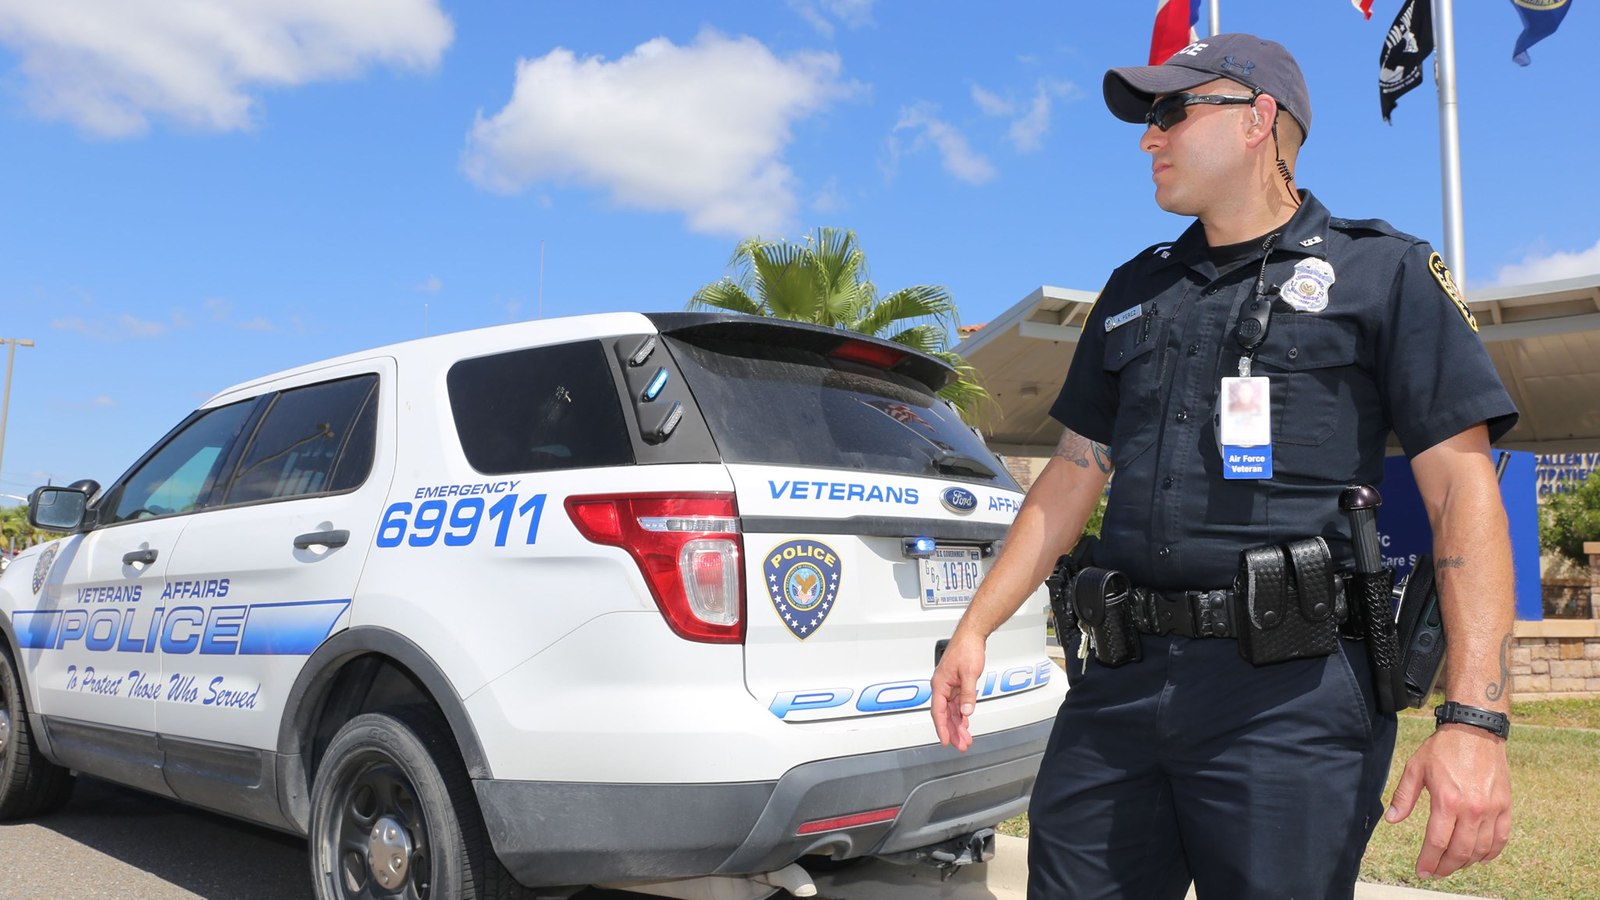 How to become a Department of Veterans Affairs police officer